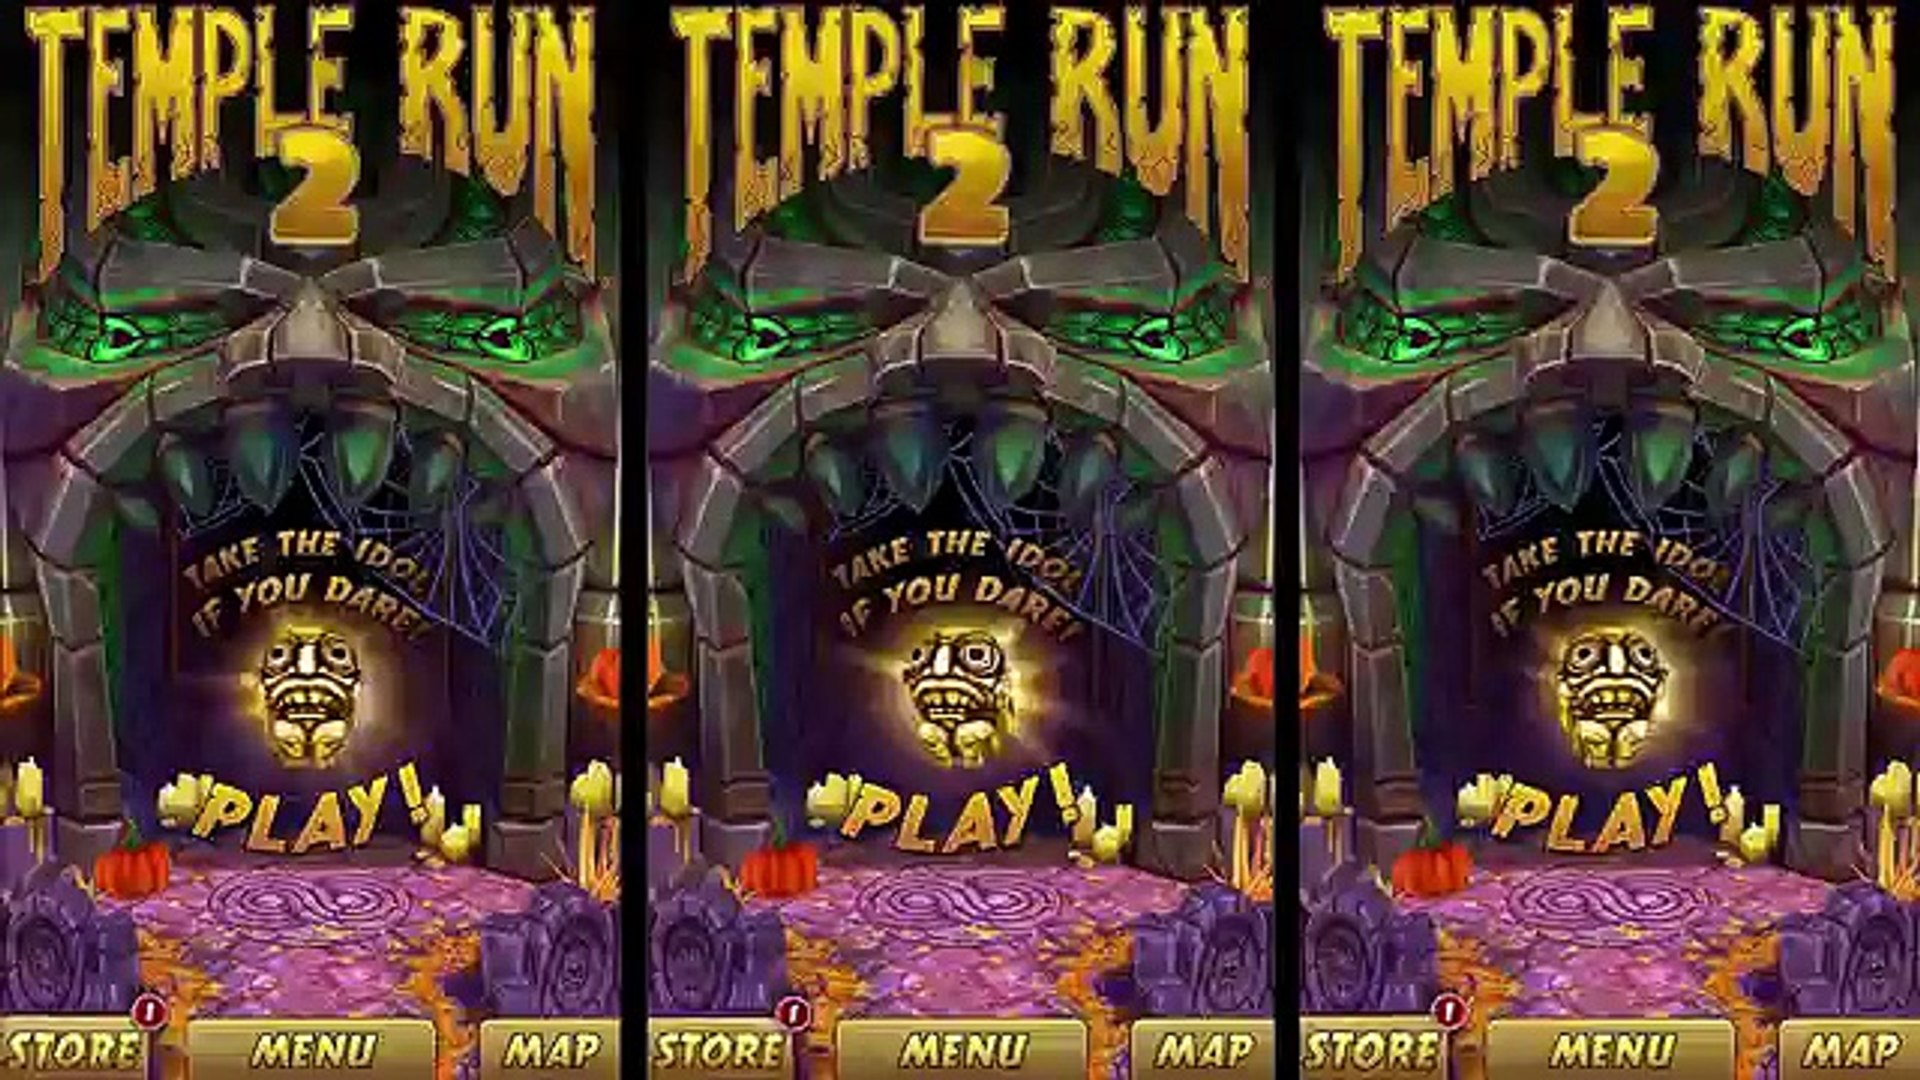 Temple run 2 Halloween Maps 🎃 and Characters 🧛 Short Gameplay